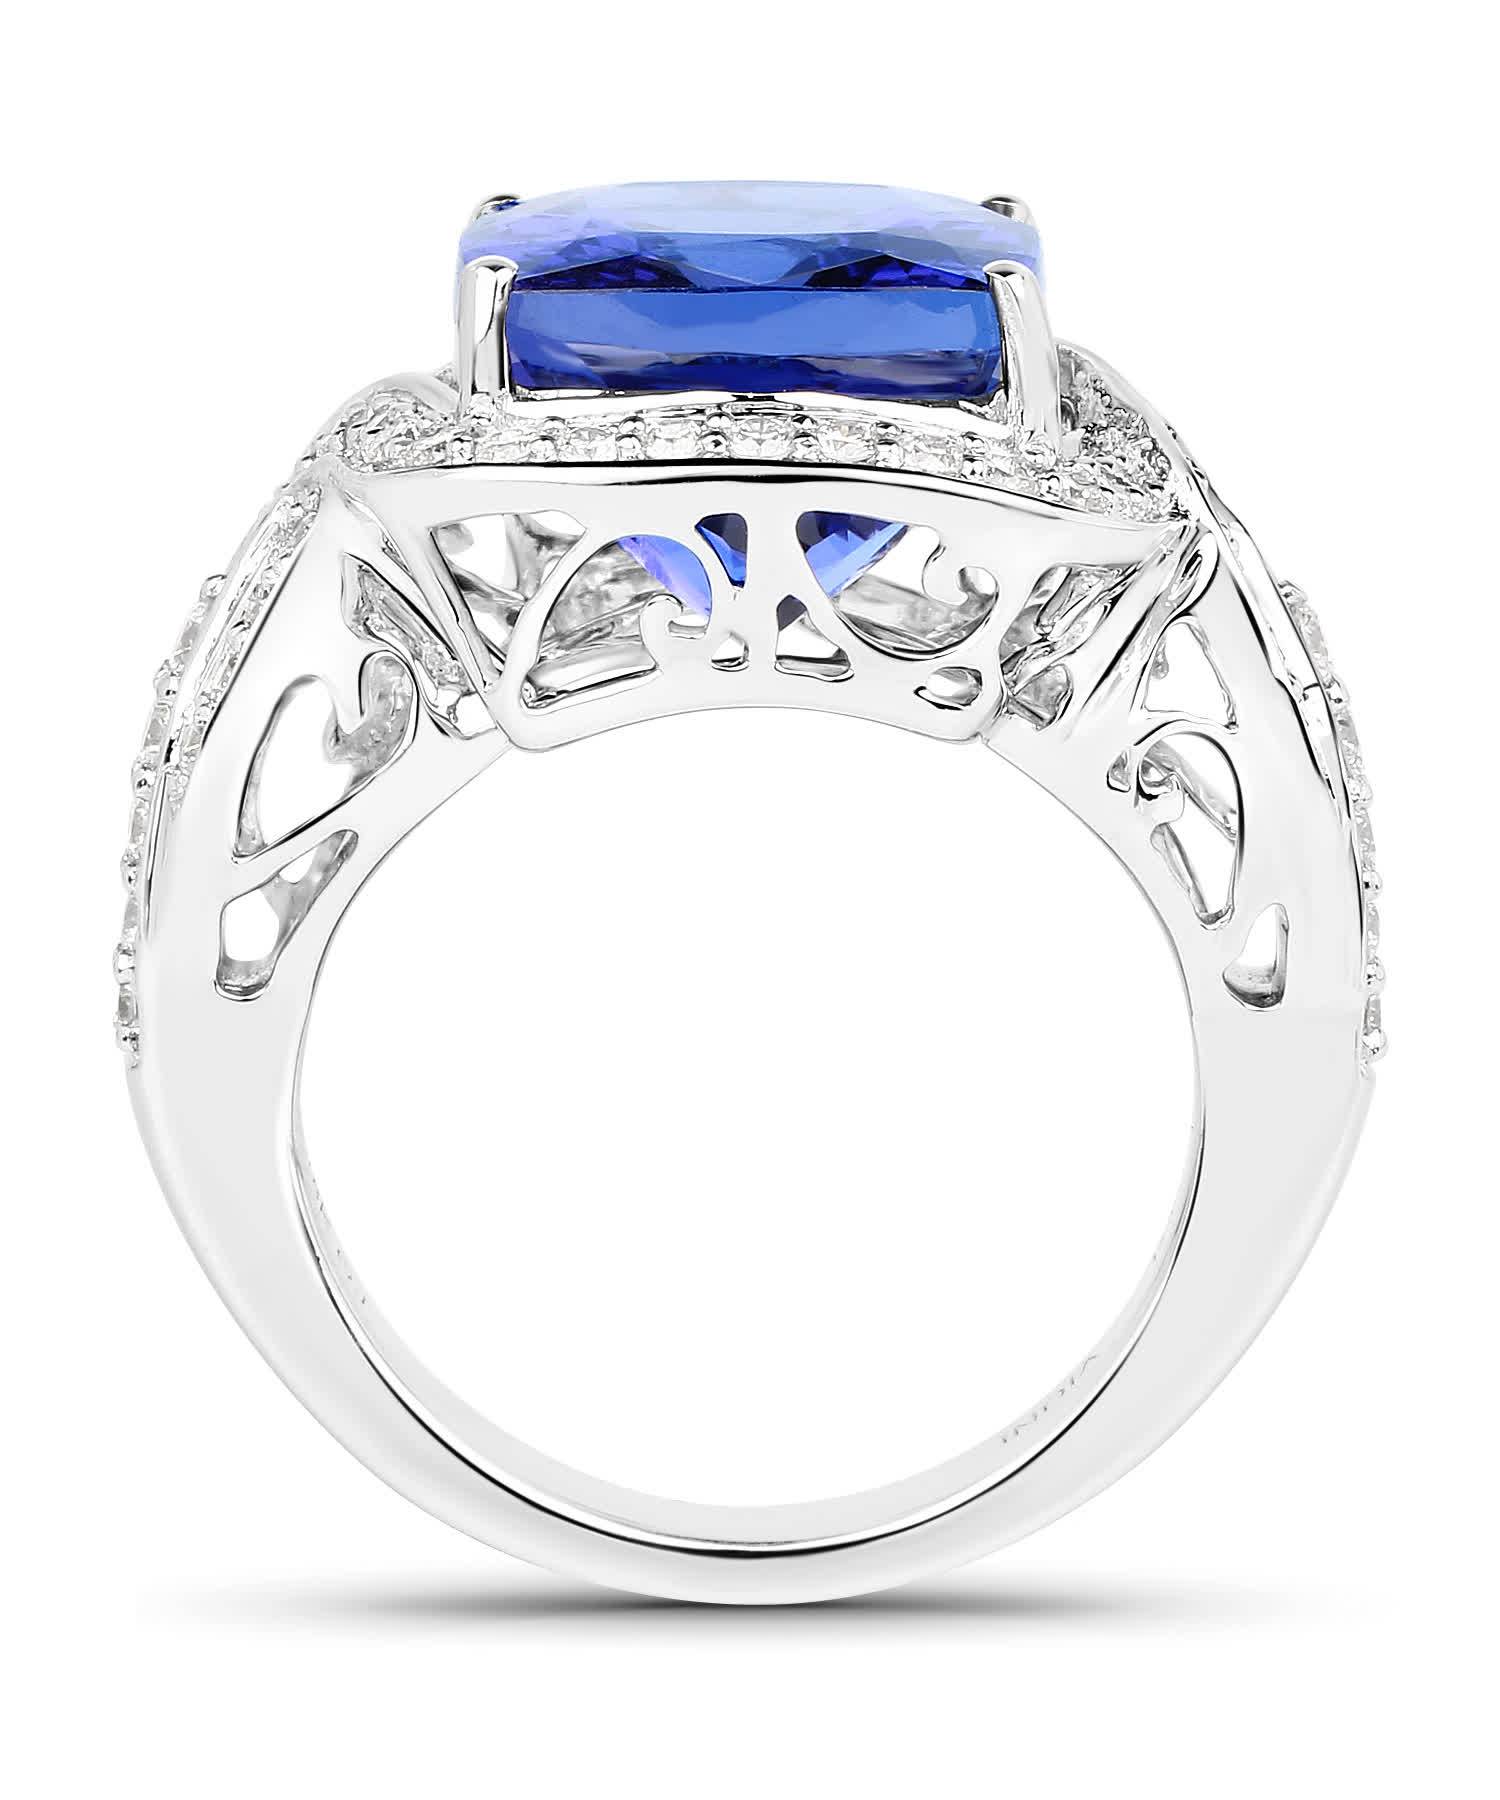 13.74ctw Natural Superior Tanzanite and Diamond 18k Gold Cocktail Ring View 2